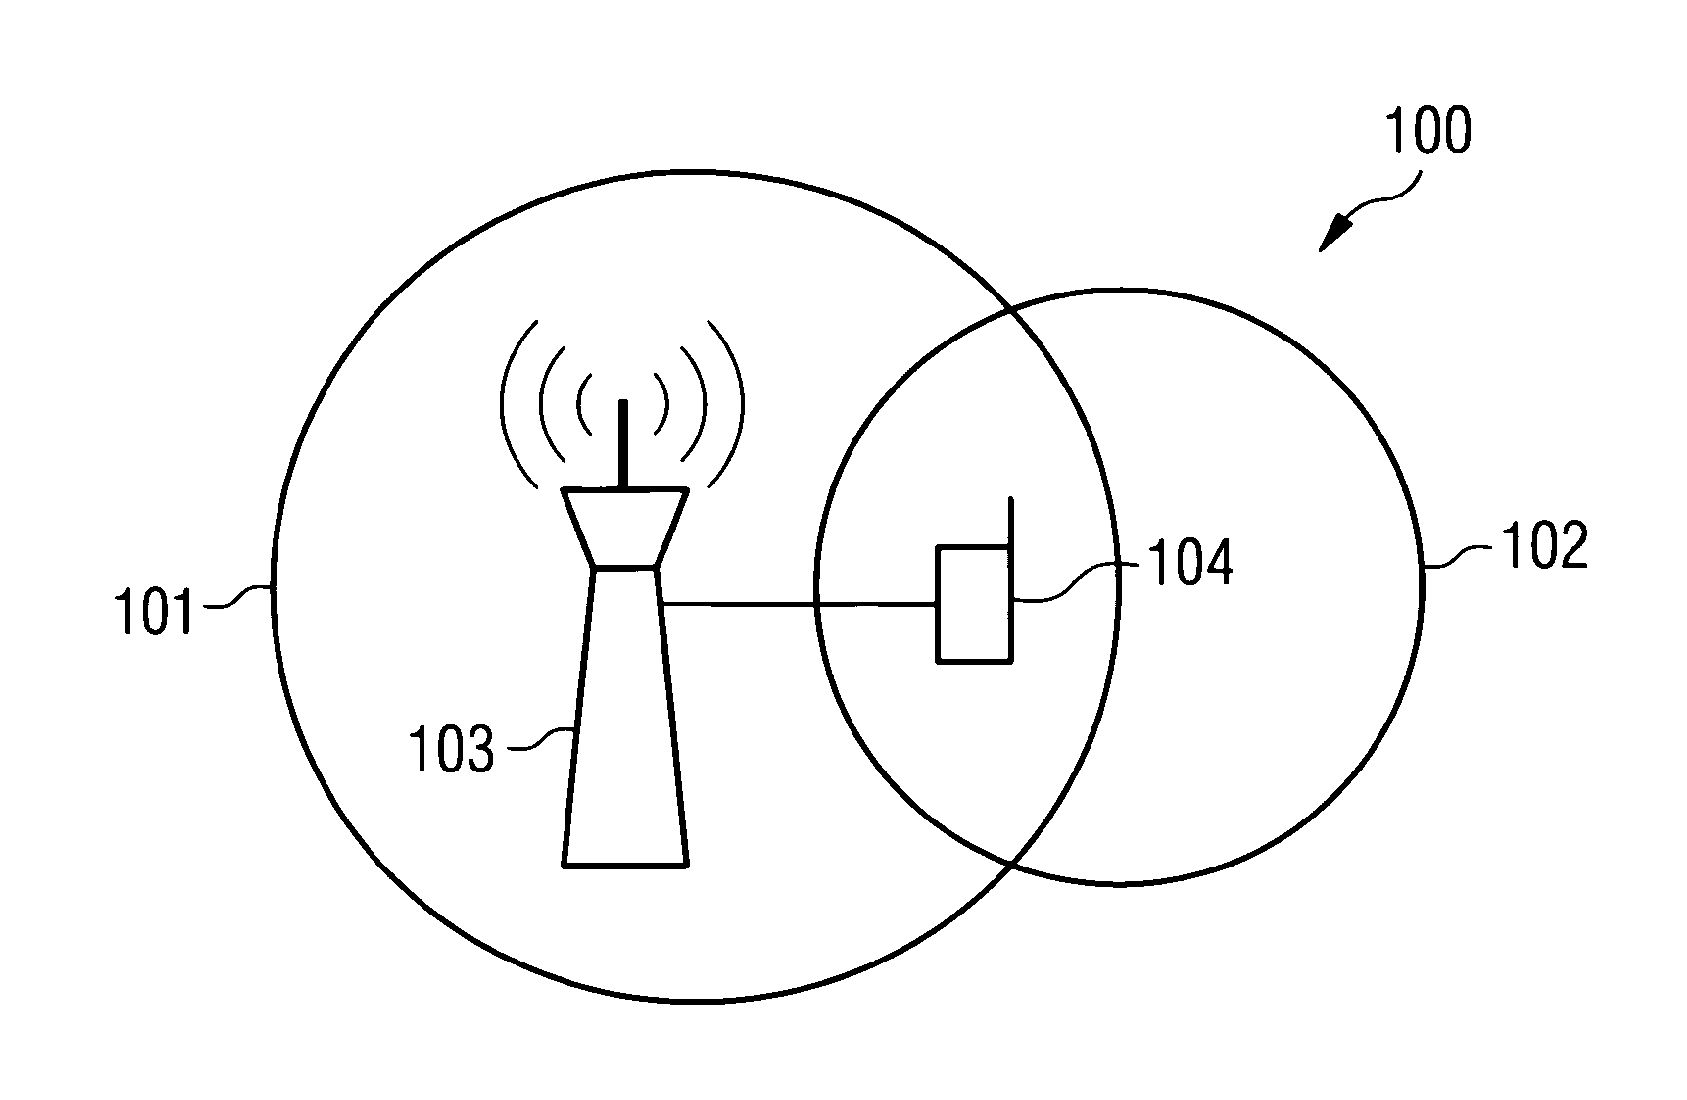 Controlling Radio Measurements of a User Equipment within a Cellular Network System